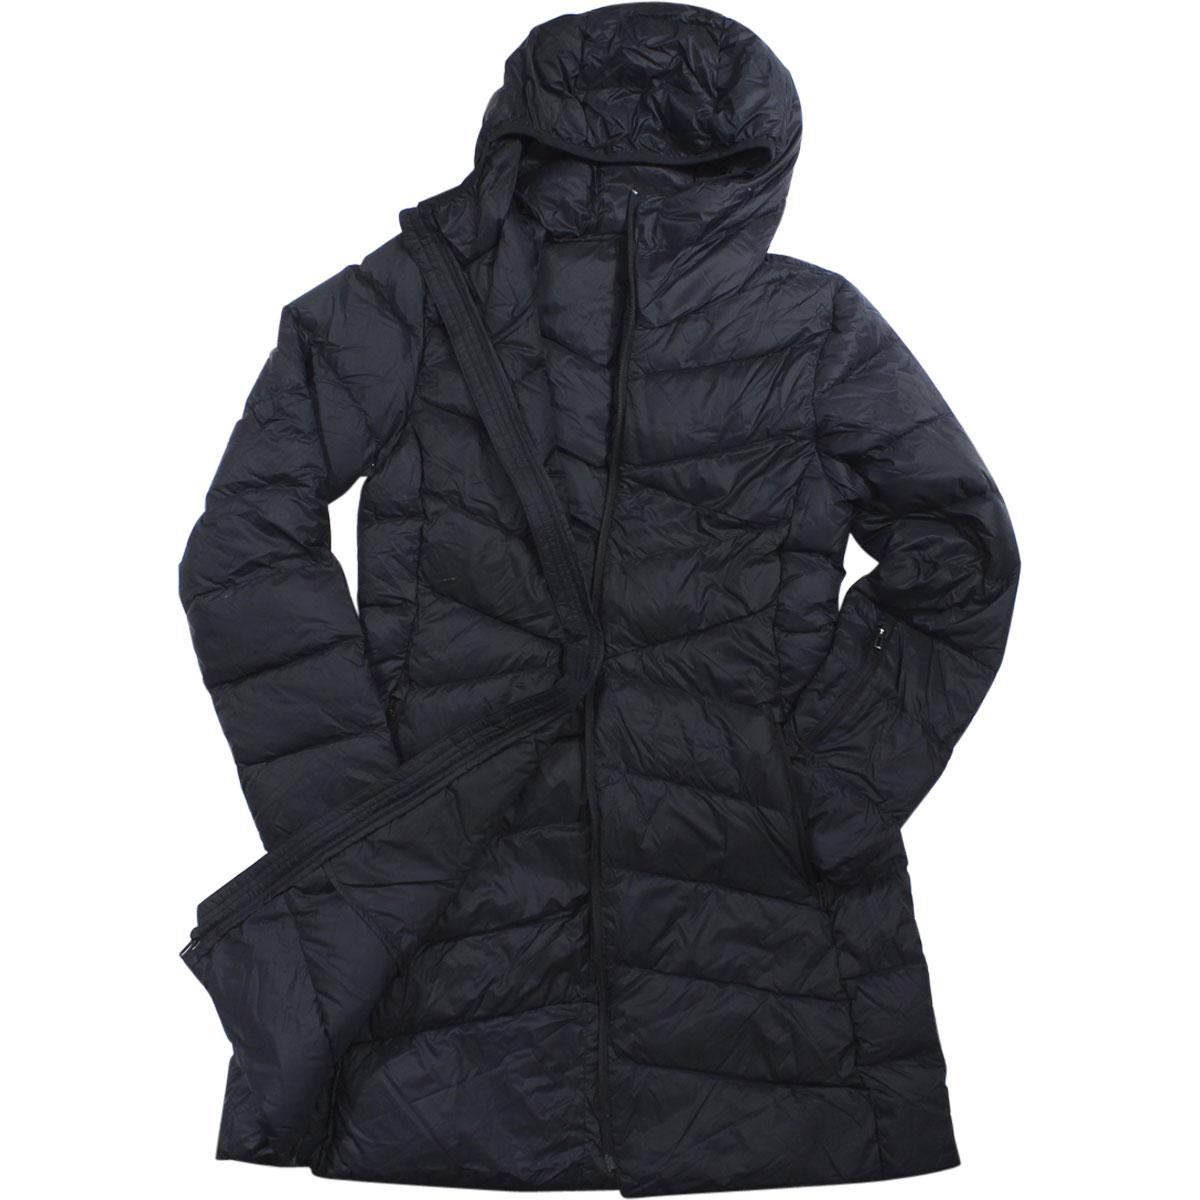 Urban Outdoor Climawarm Nuvic 